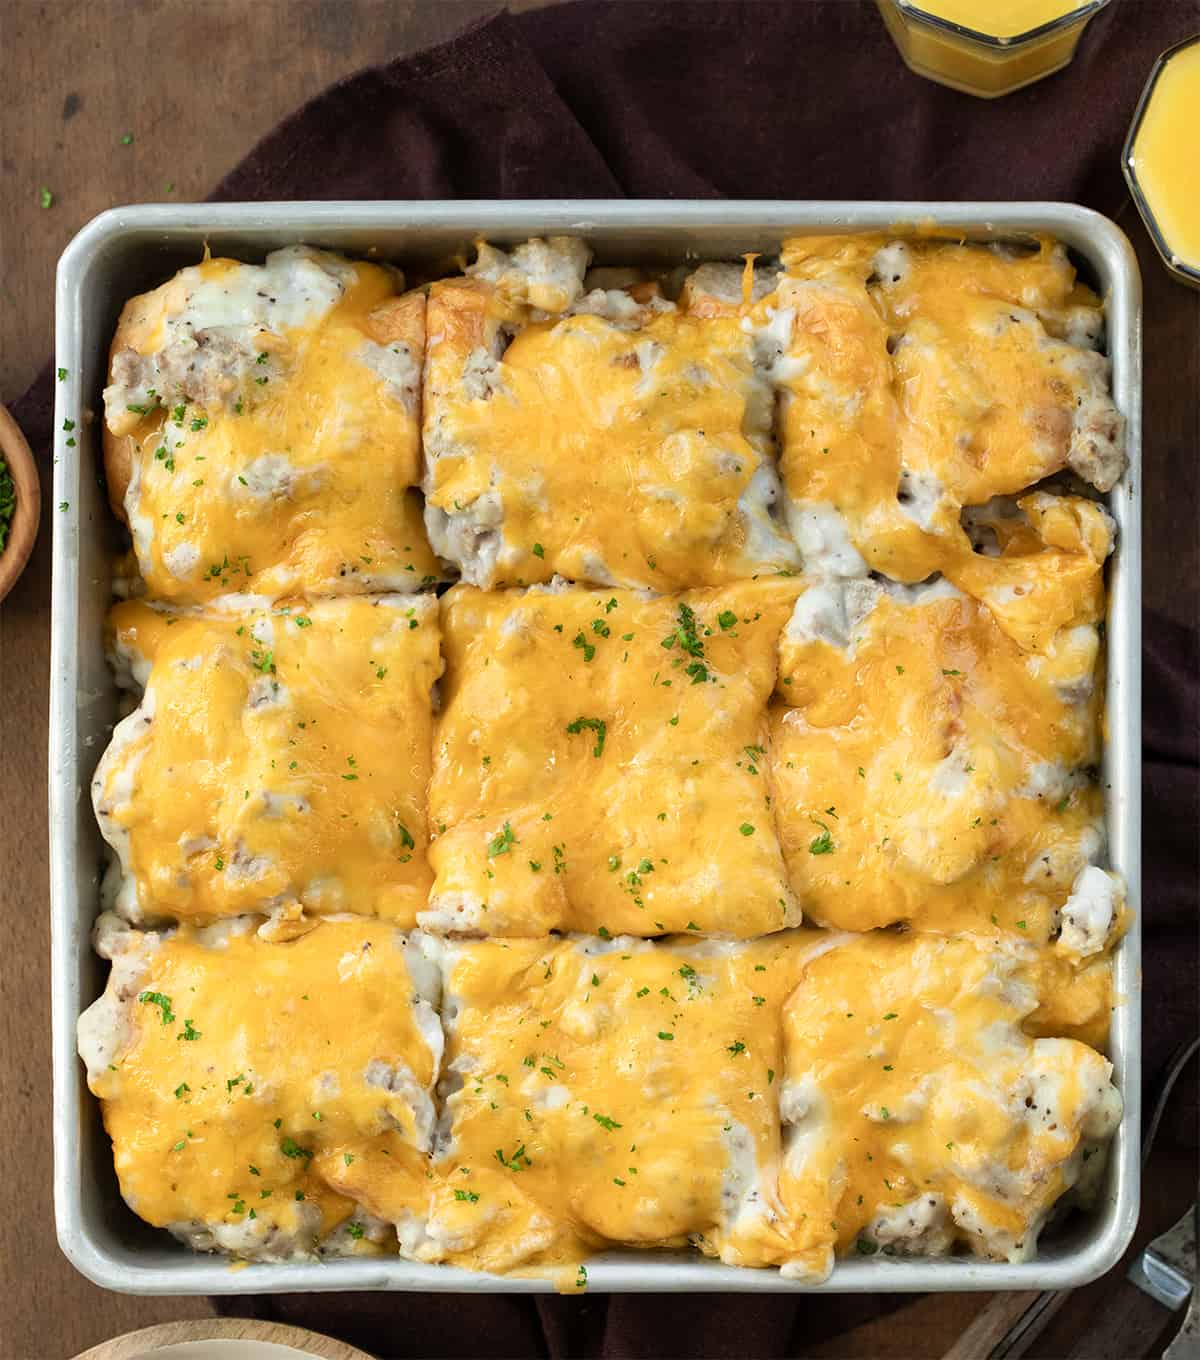 Pan of Easy Biscuits and Gravy Bake cut into pieces on a wooden table from overhead.